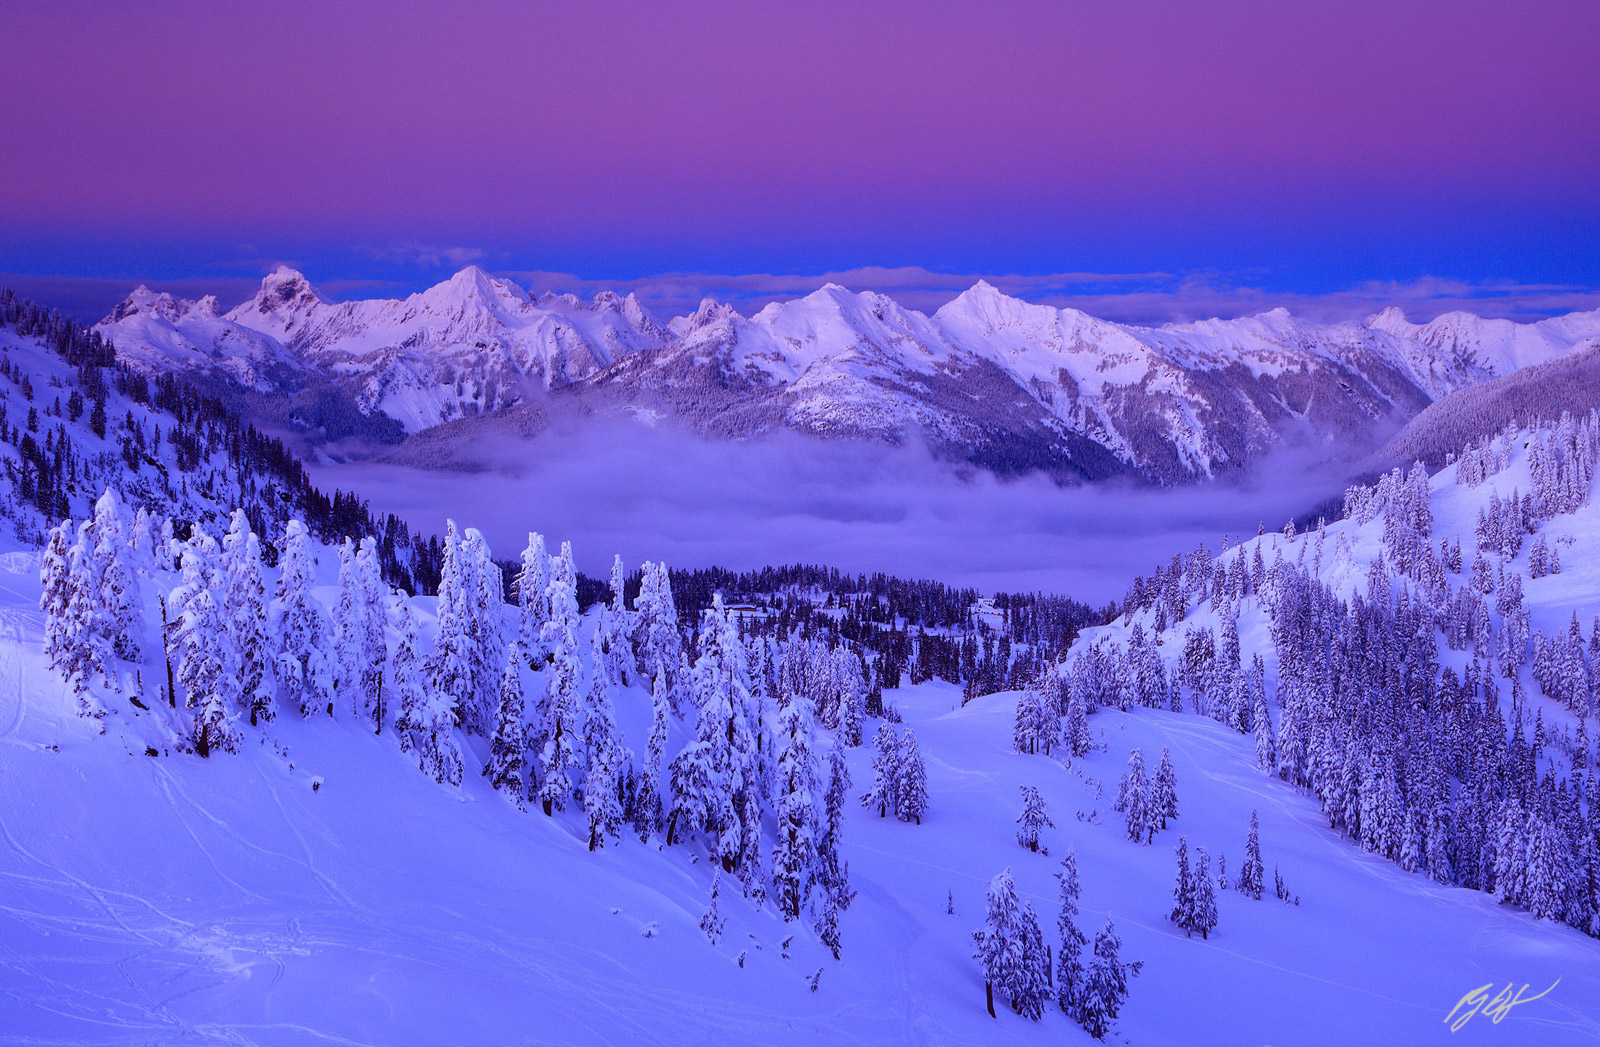 Winter Sunset over the North Cascade from Artist Ridge in the Mt Baker National Recreation Area in Washington